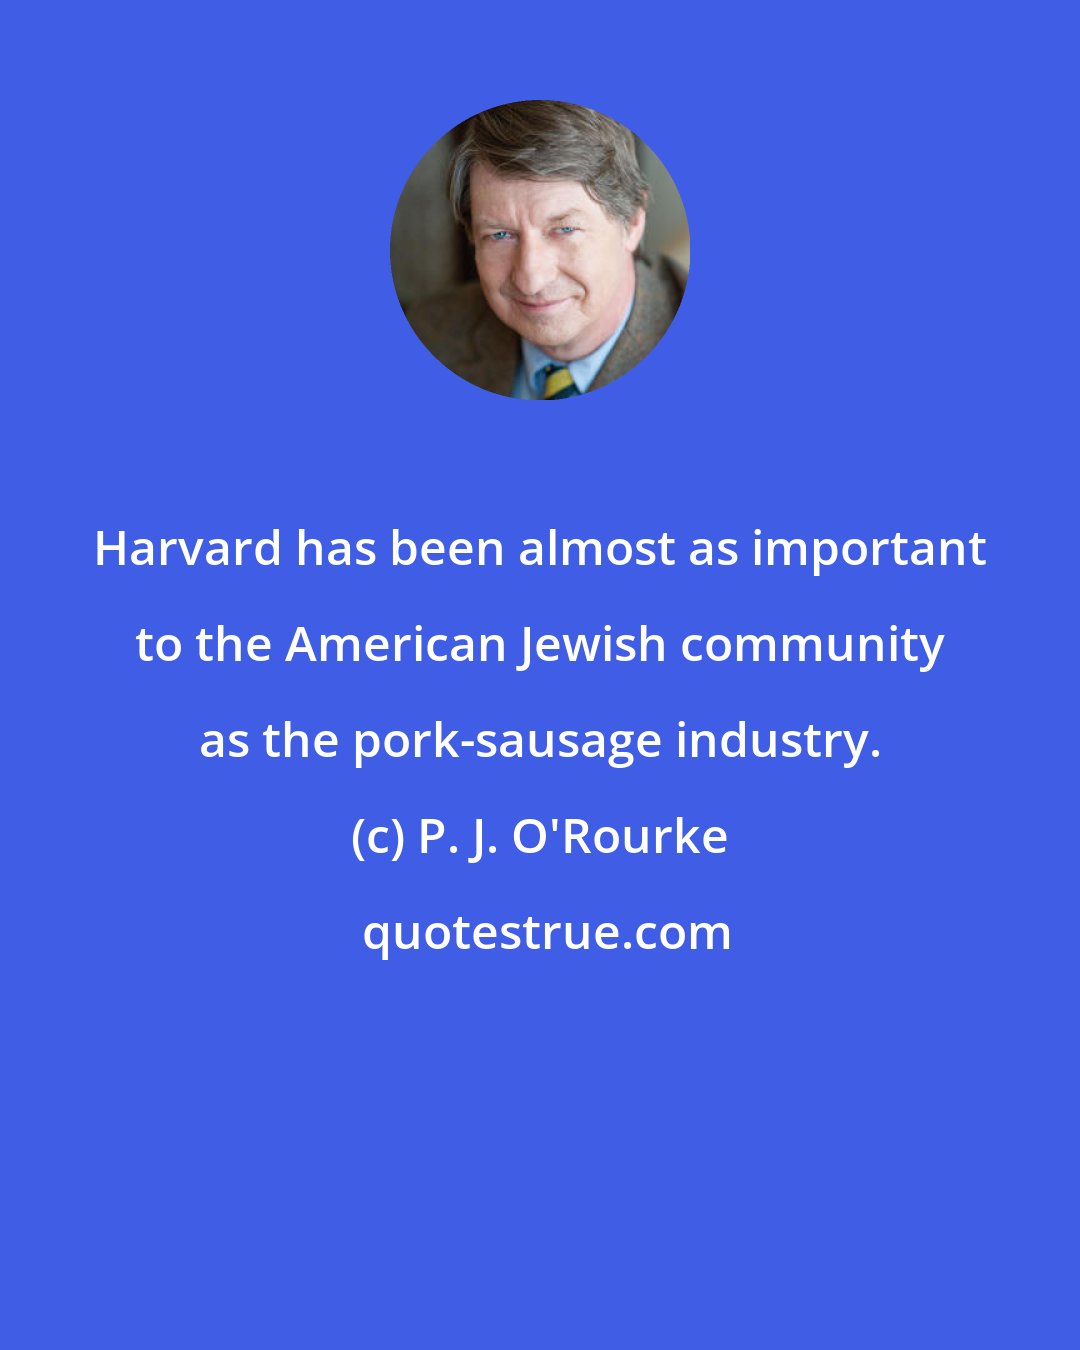 P. J. O'Rourke: Harvard has been almost as important to the American Jewish community as the pork-sausage industry.